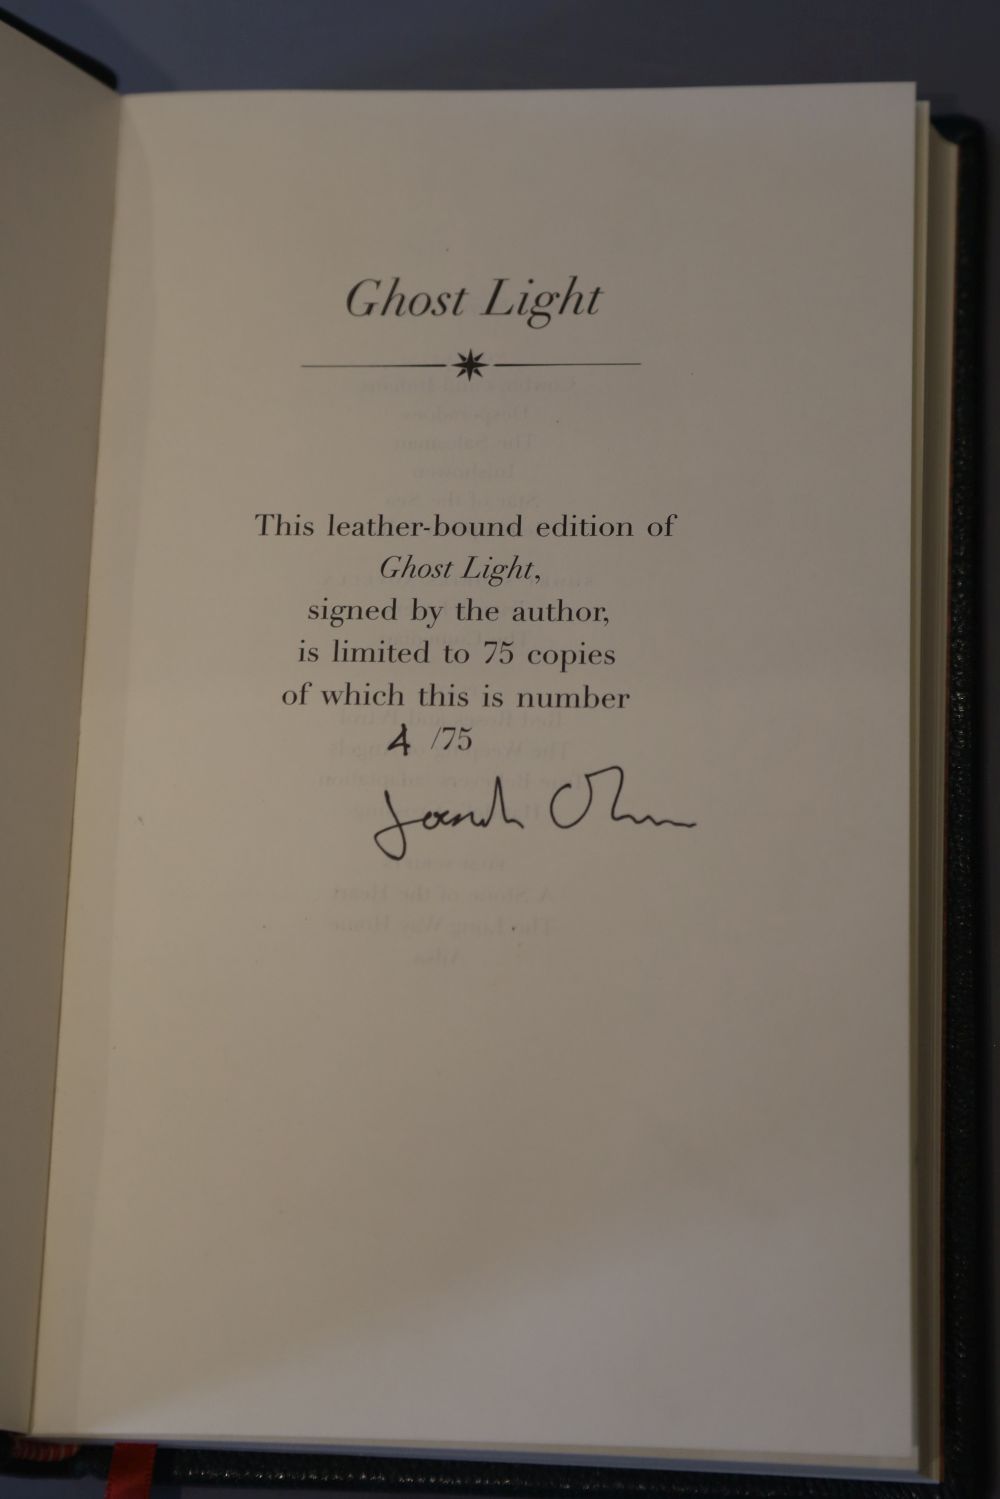 OConnor, Joseph - Ghost Light, one of 75, signed by the author, 8vo, green decorated leather boards, with slip case, Harvill Secker, L